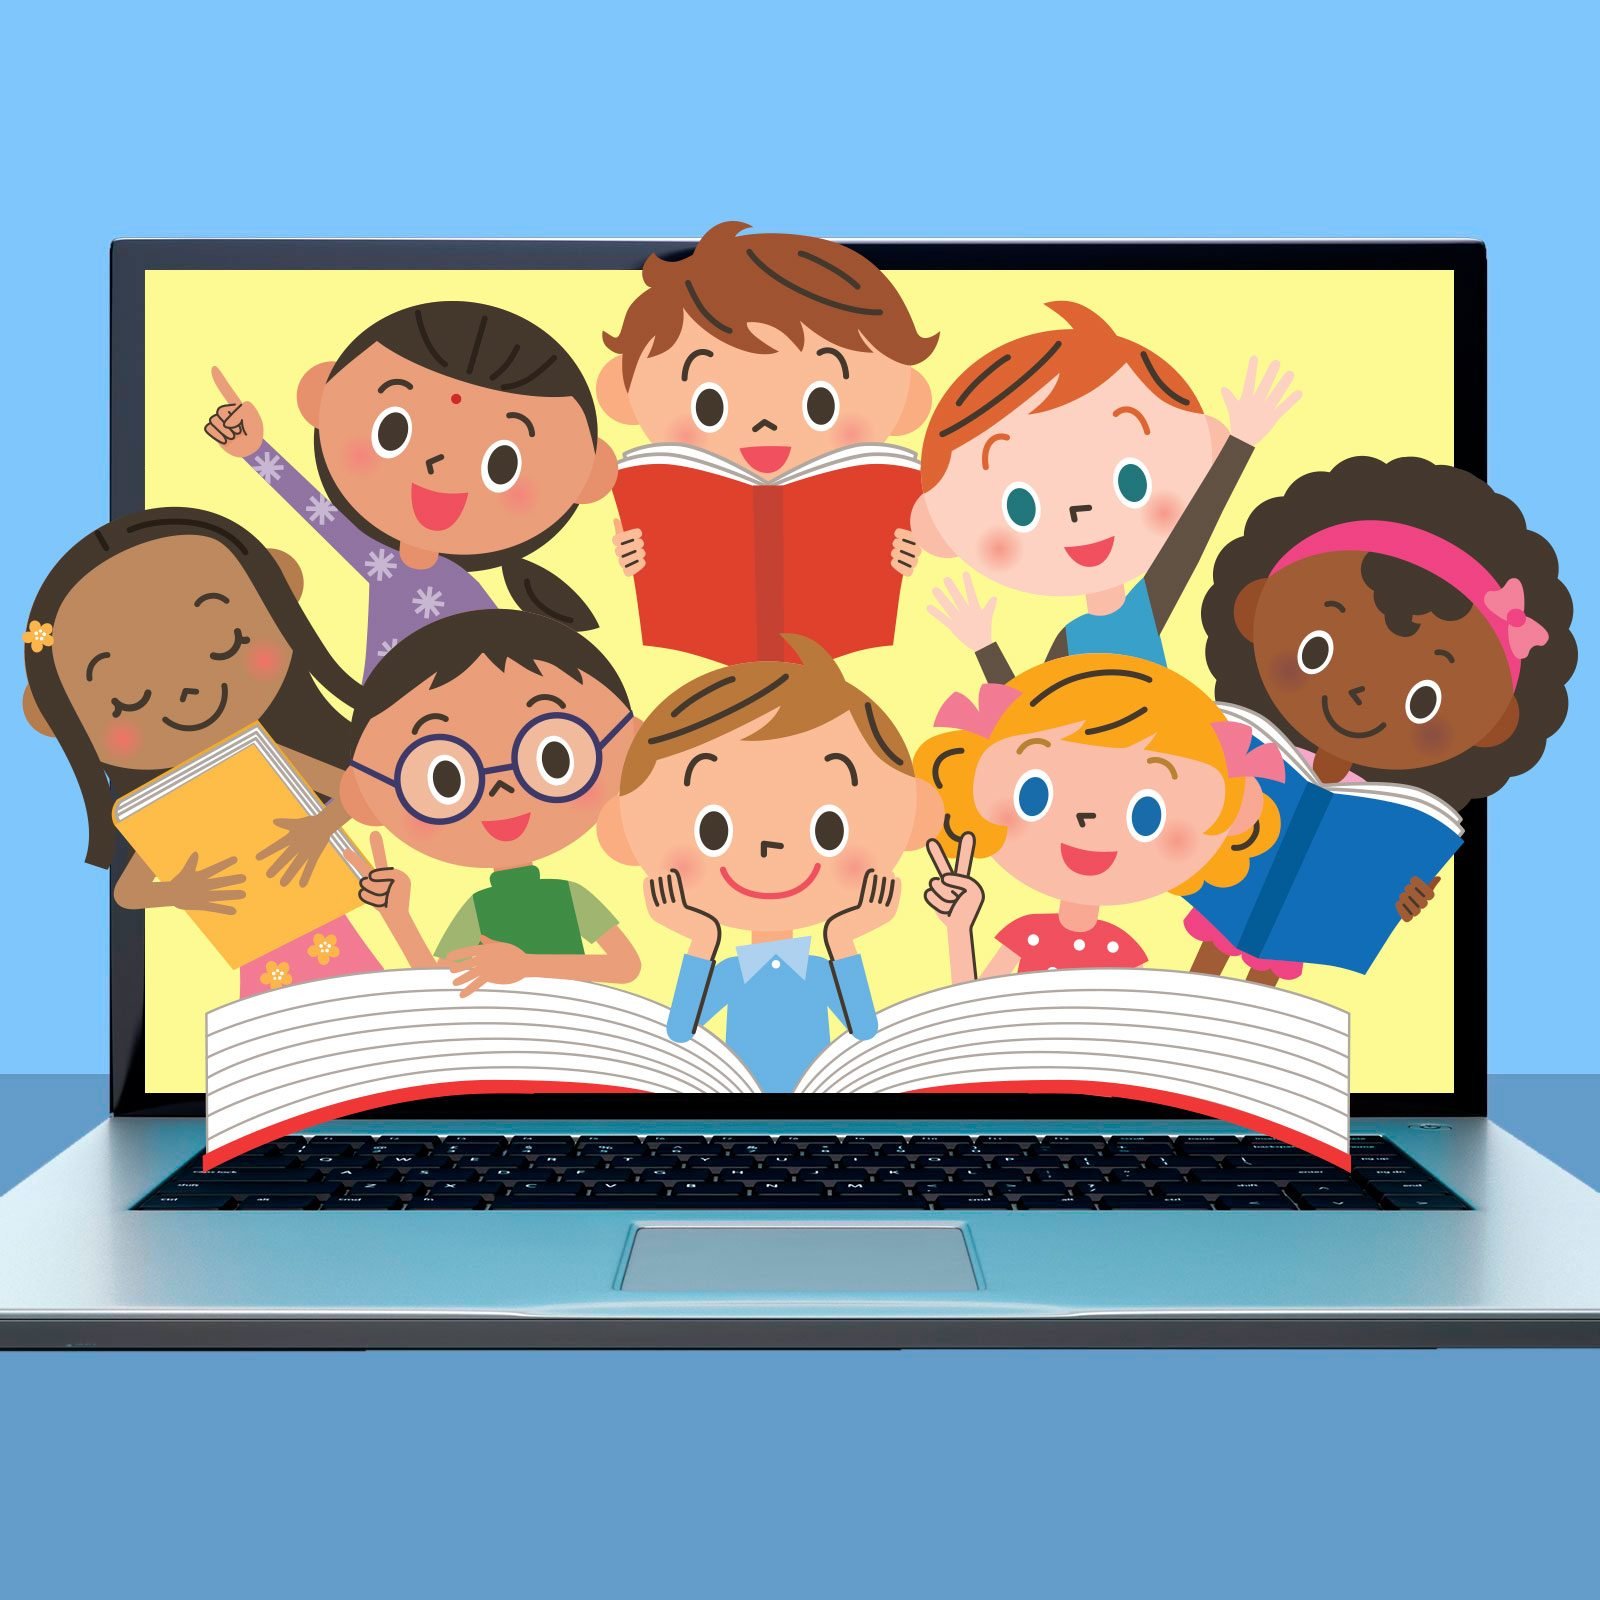 15 Sites for Free Online Books for Kids